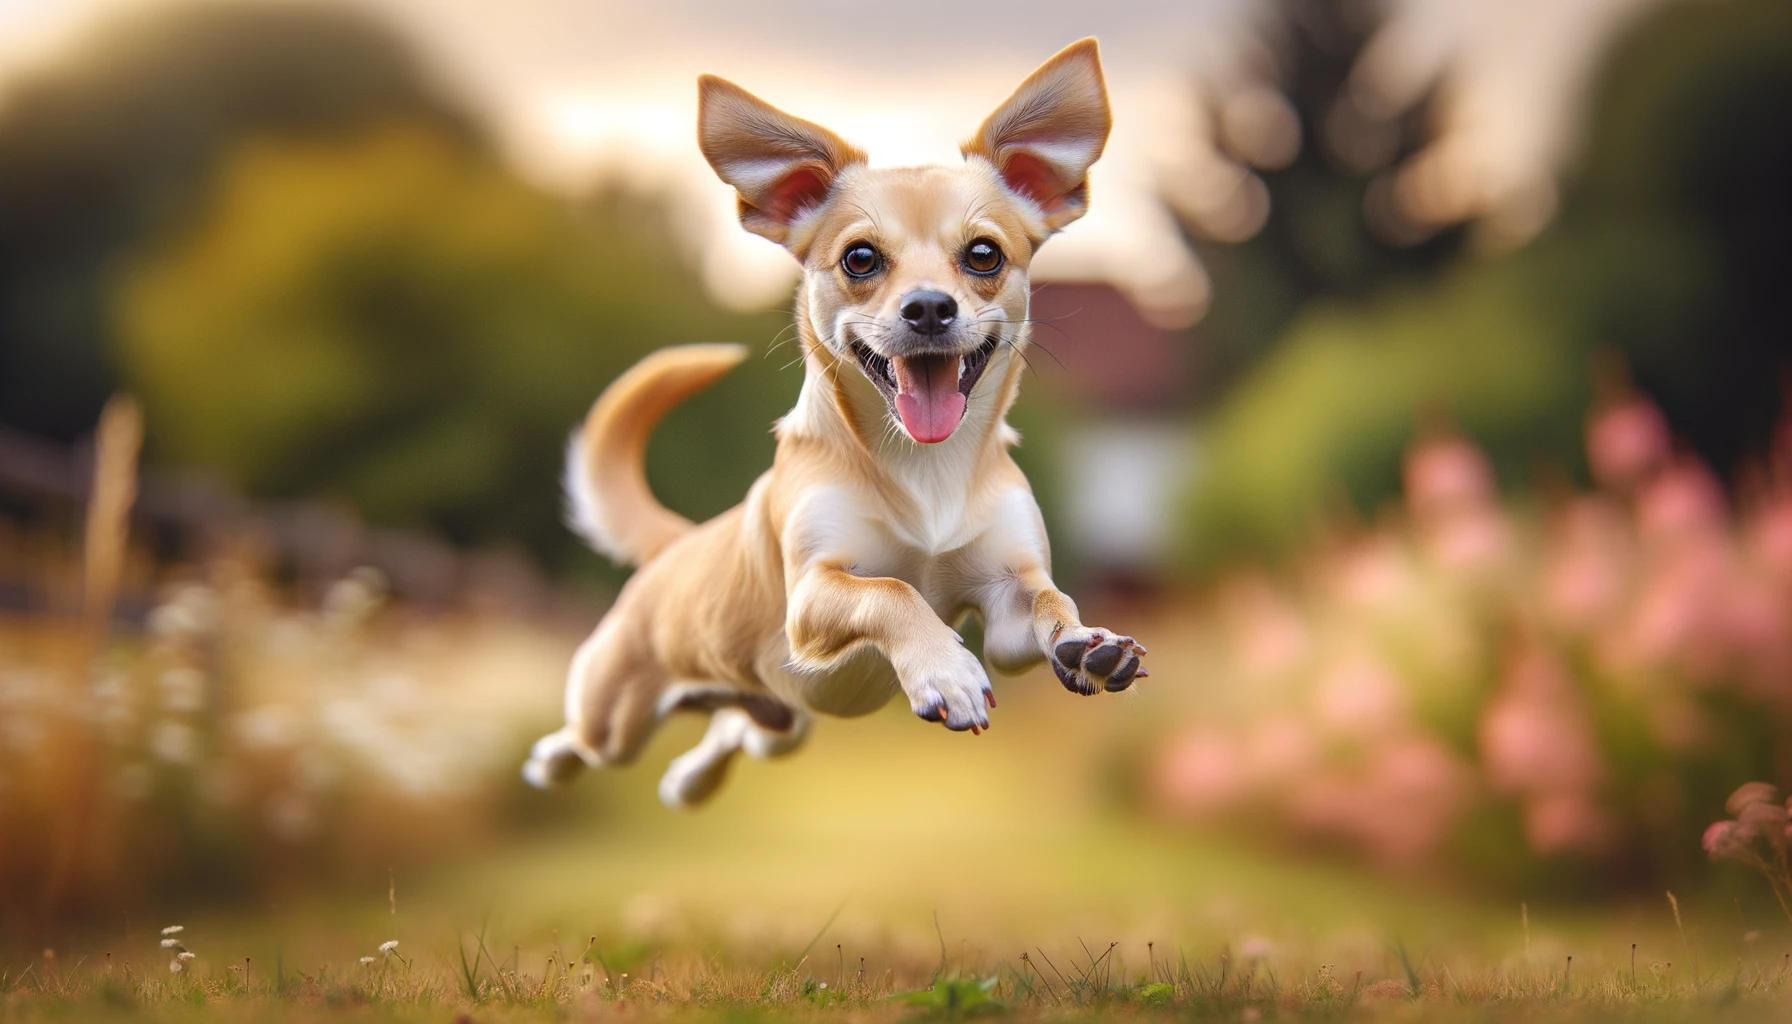 A sprightly Labrahuahua leaping in the air, capturing the unpredictable and dynamic nature of this Chihuahua Retriever mix